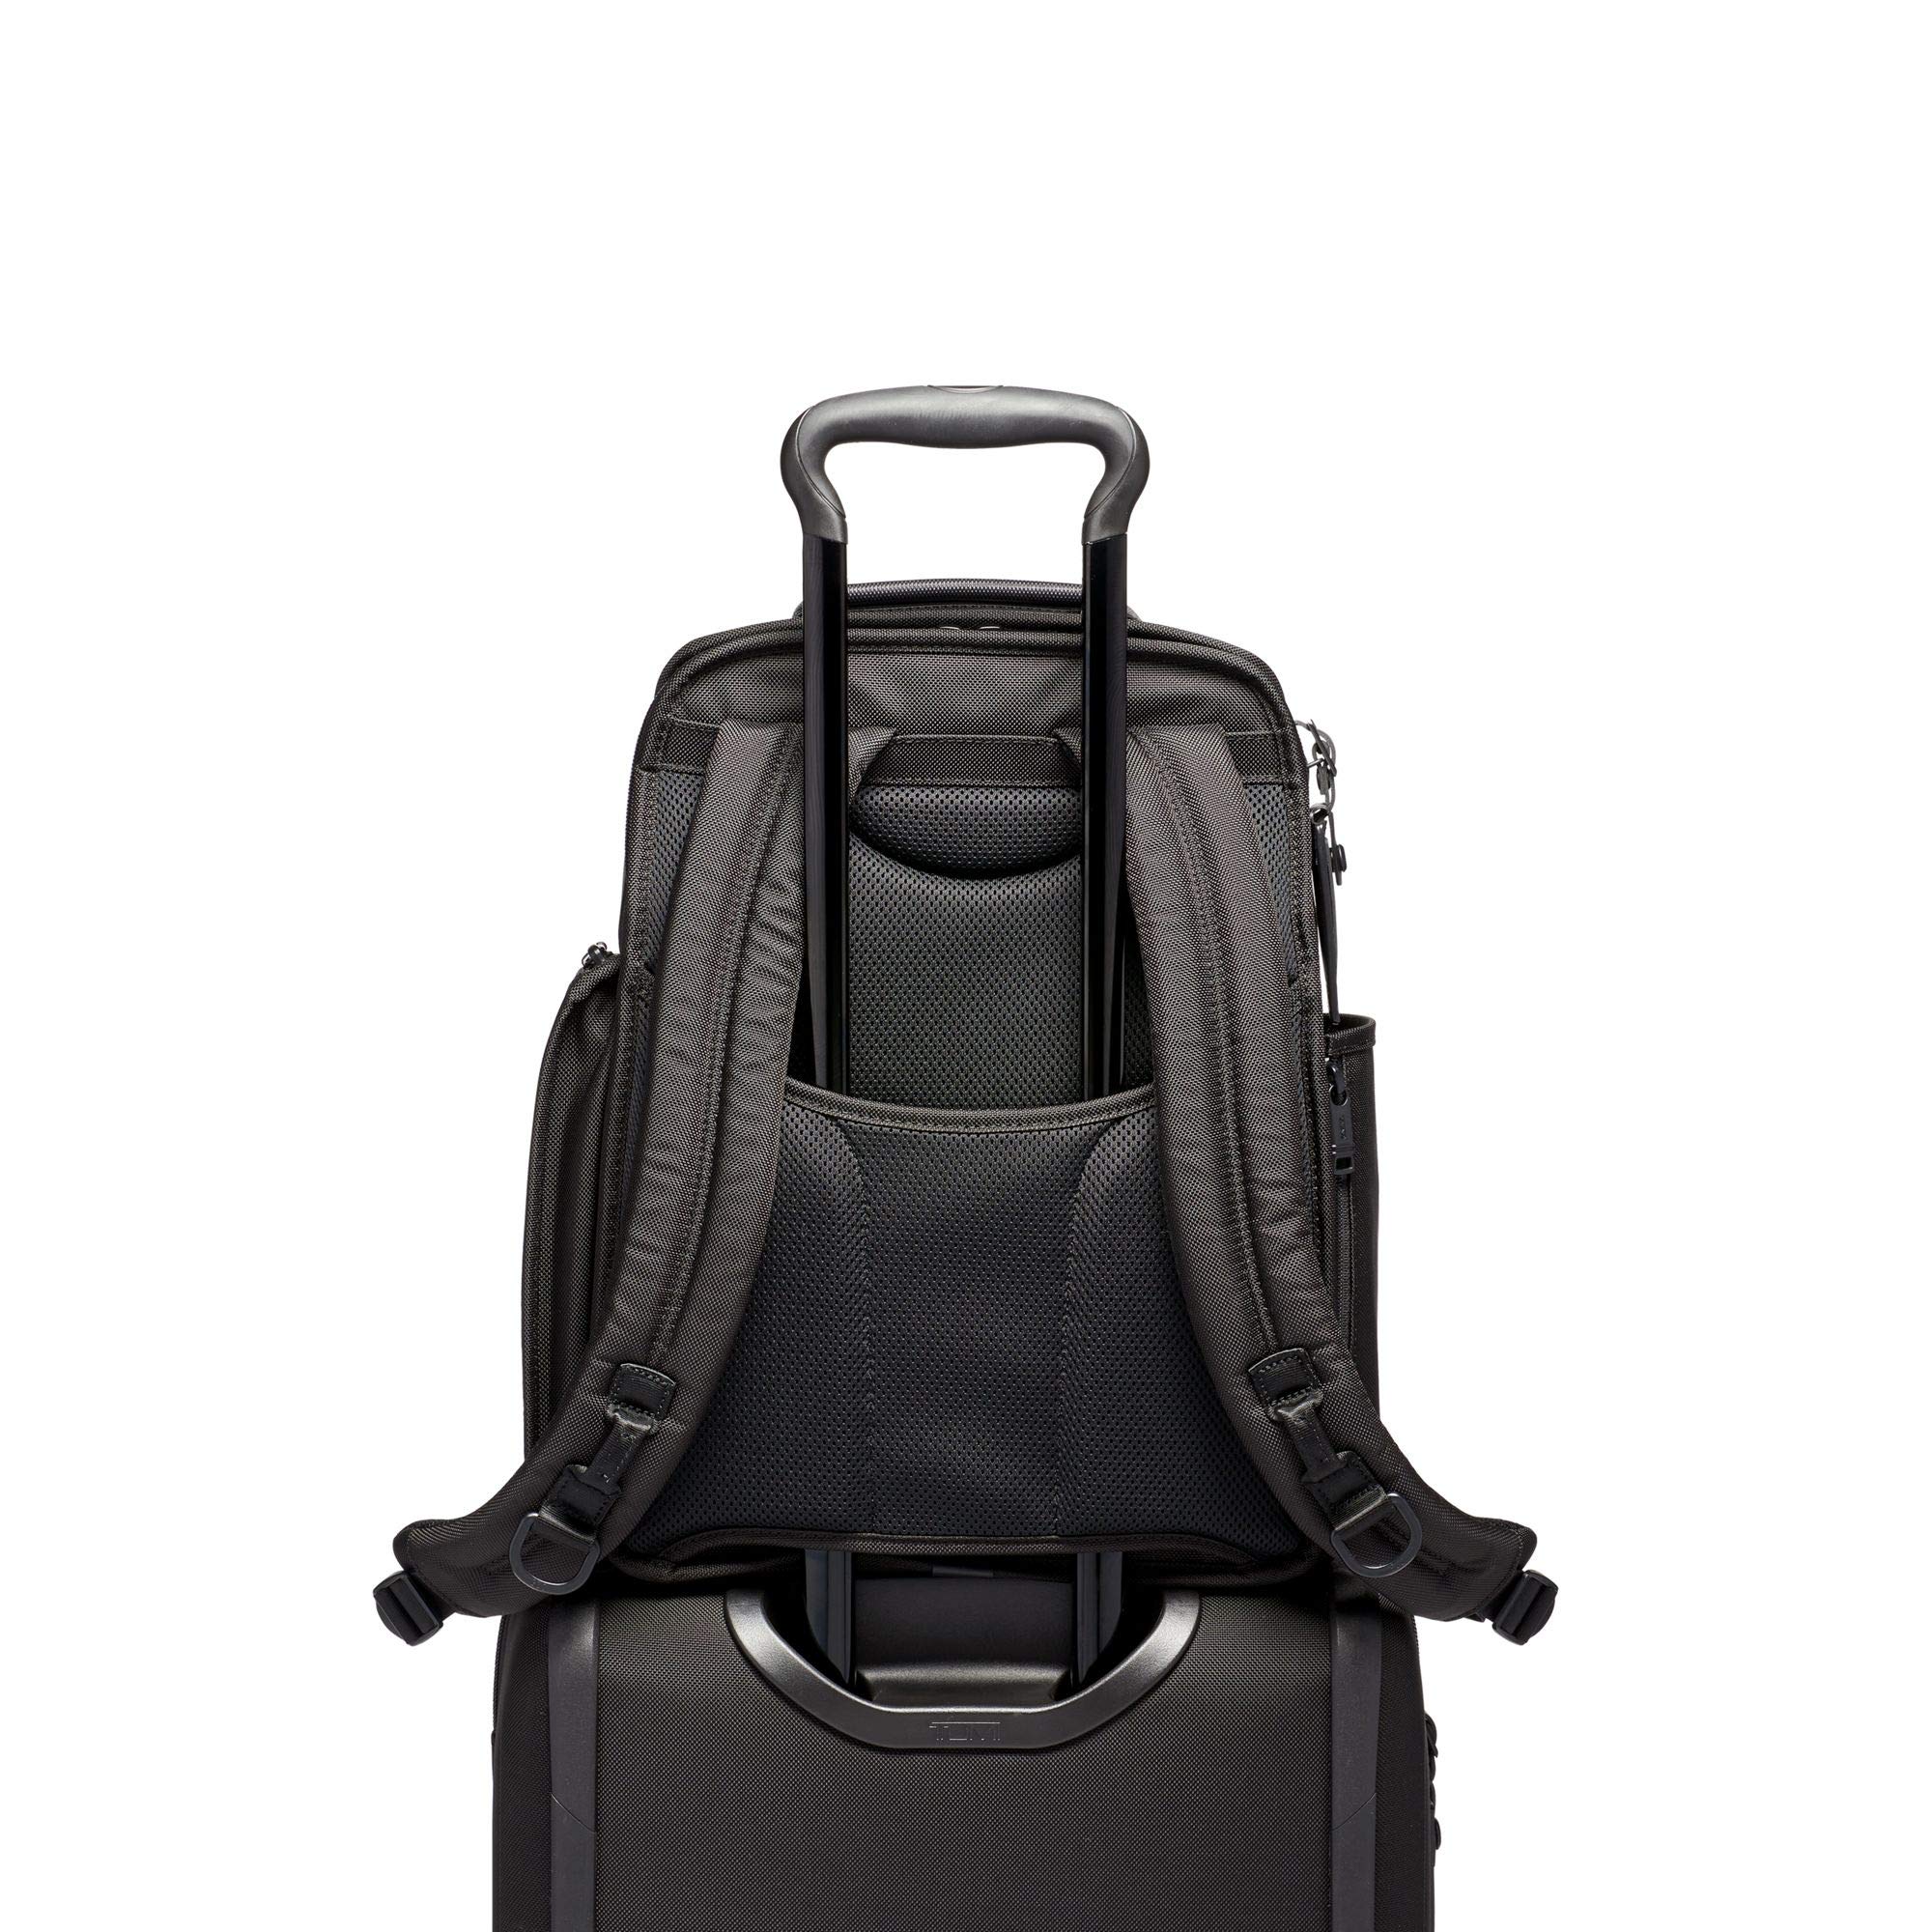 TUMI Alpha 3 Compact Laptop Brief Pack - For Commuters and Business Travelers - 15-Inch Computer Backpack for Men and Women - Black